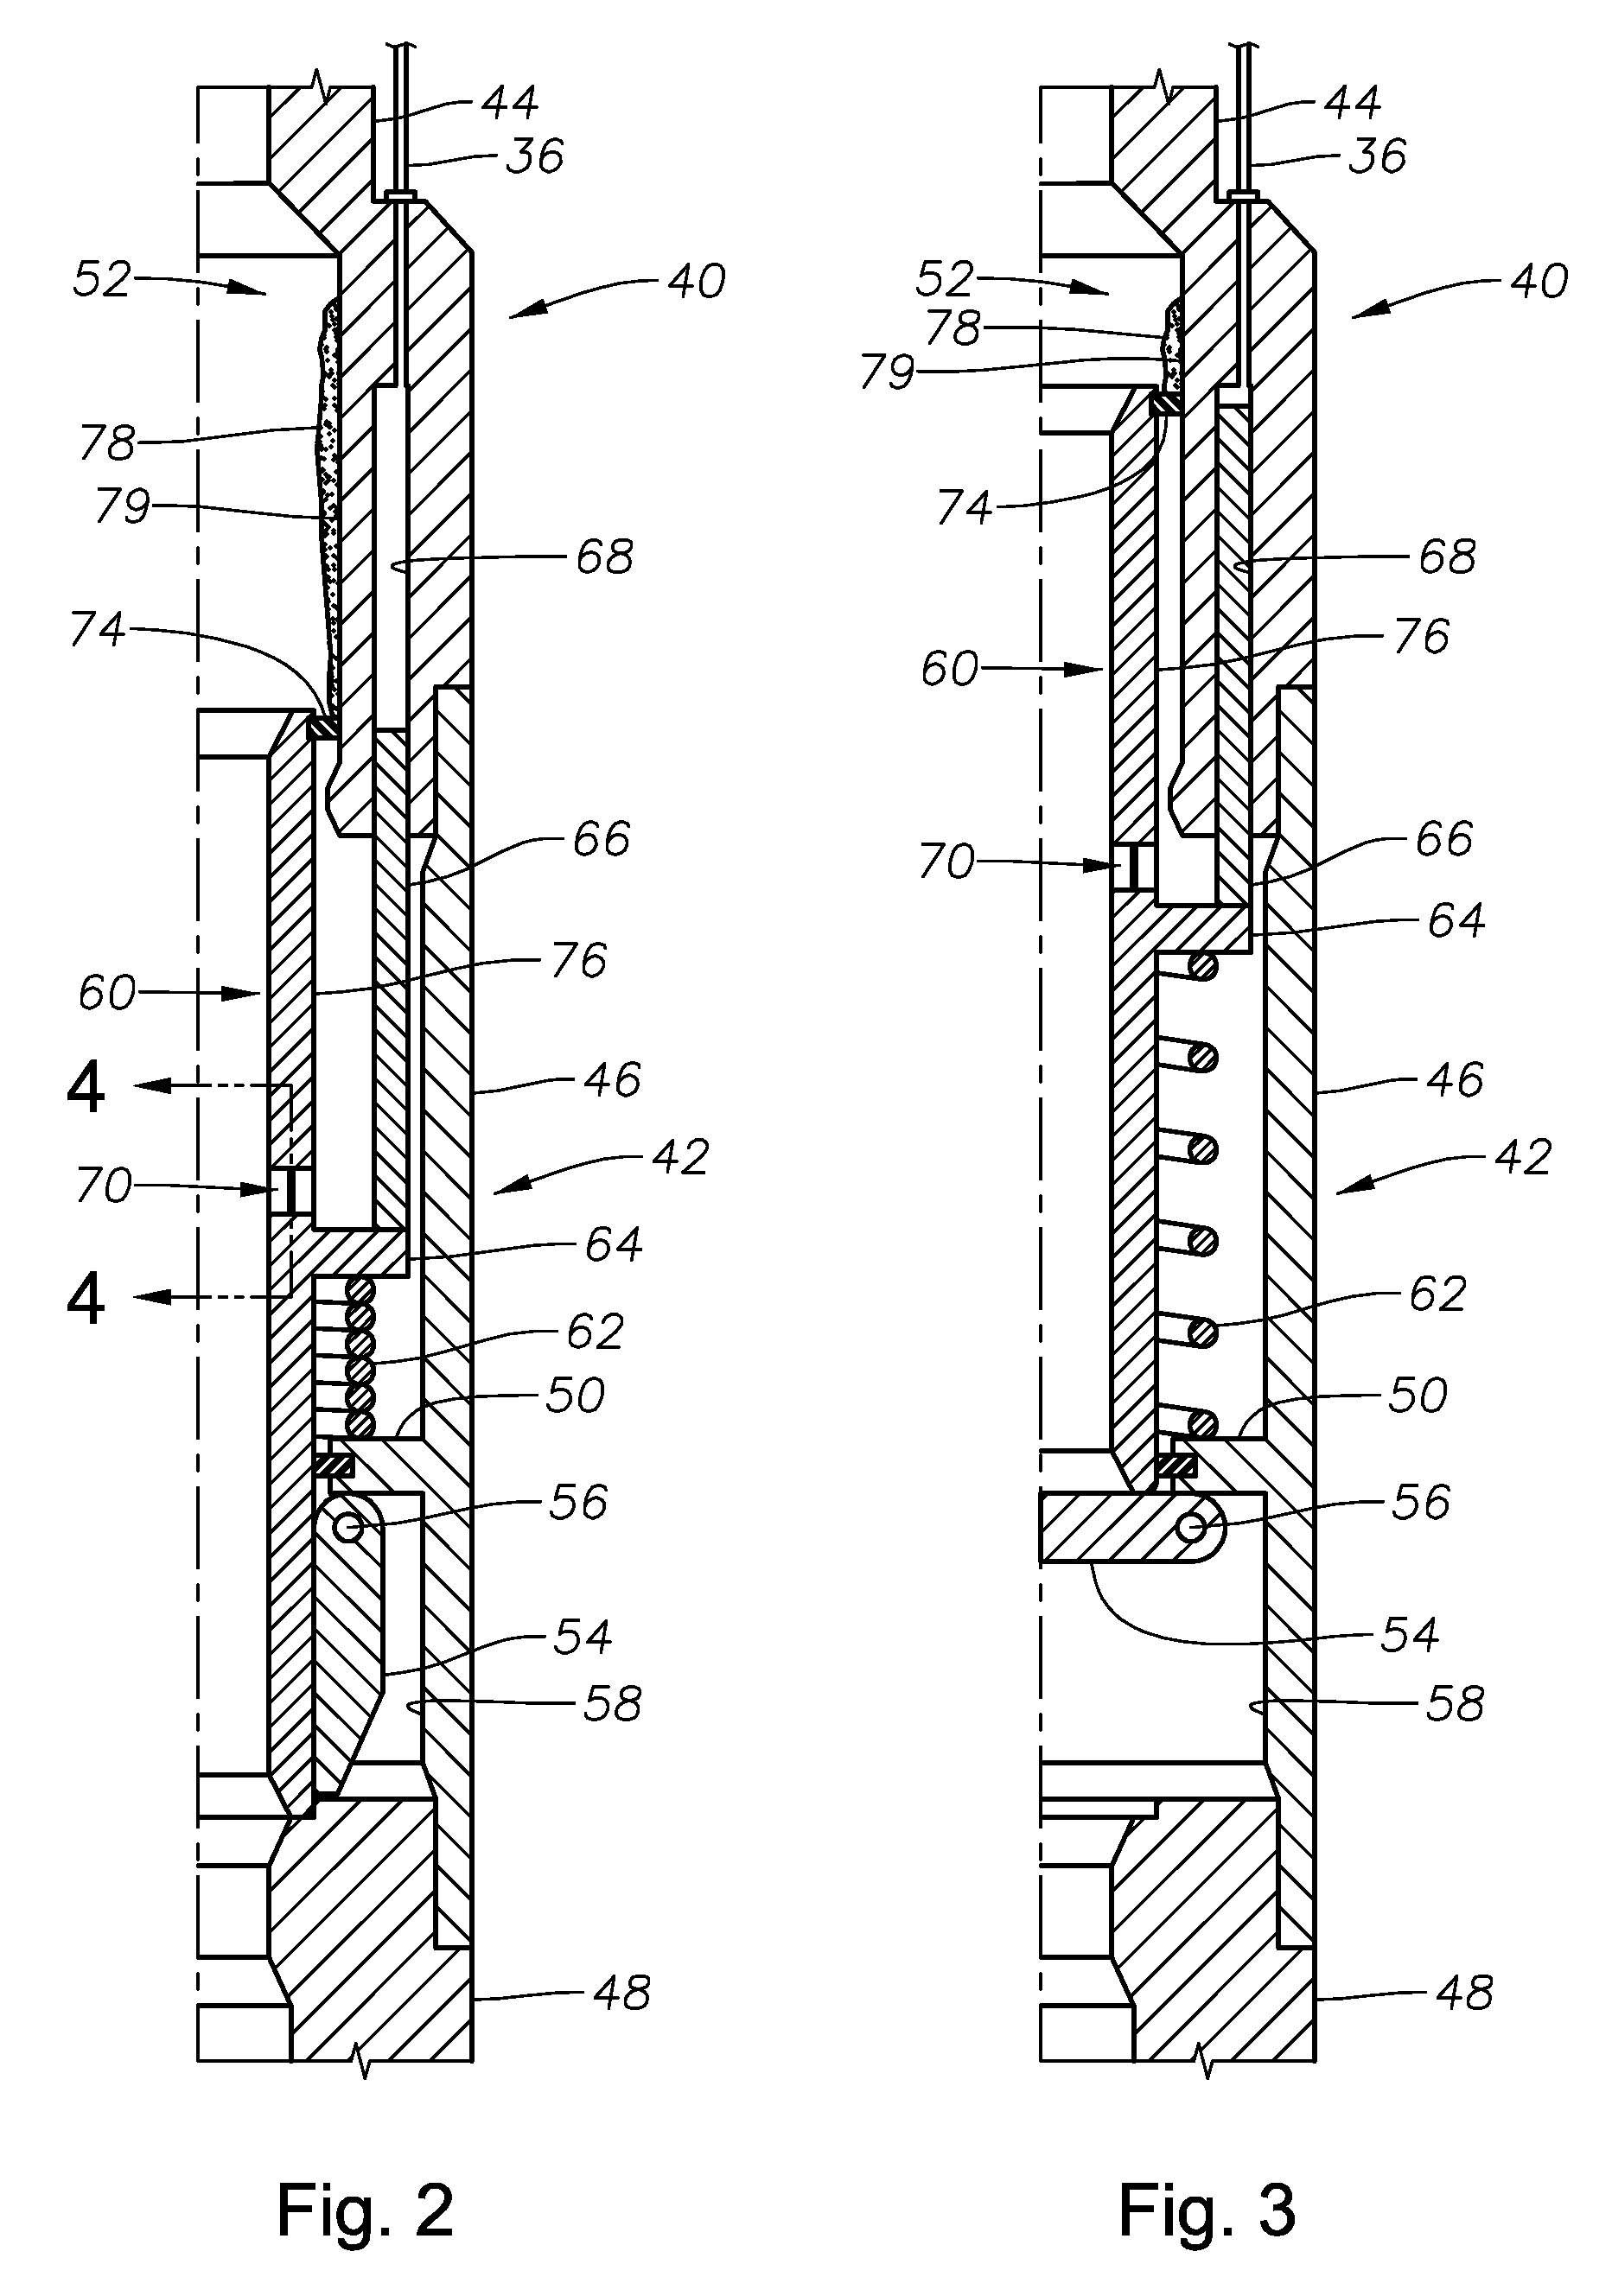 Methods for Preventing Mineral Scale Buildup in Subsurface Safety Valves